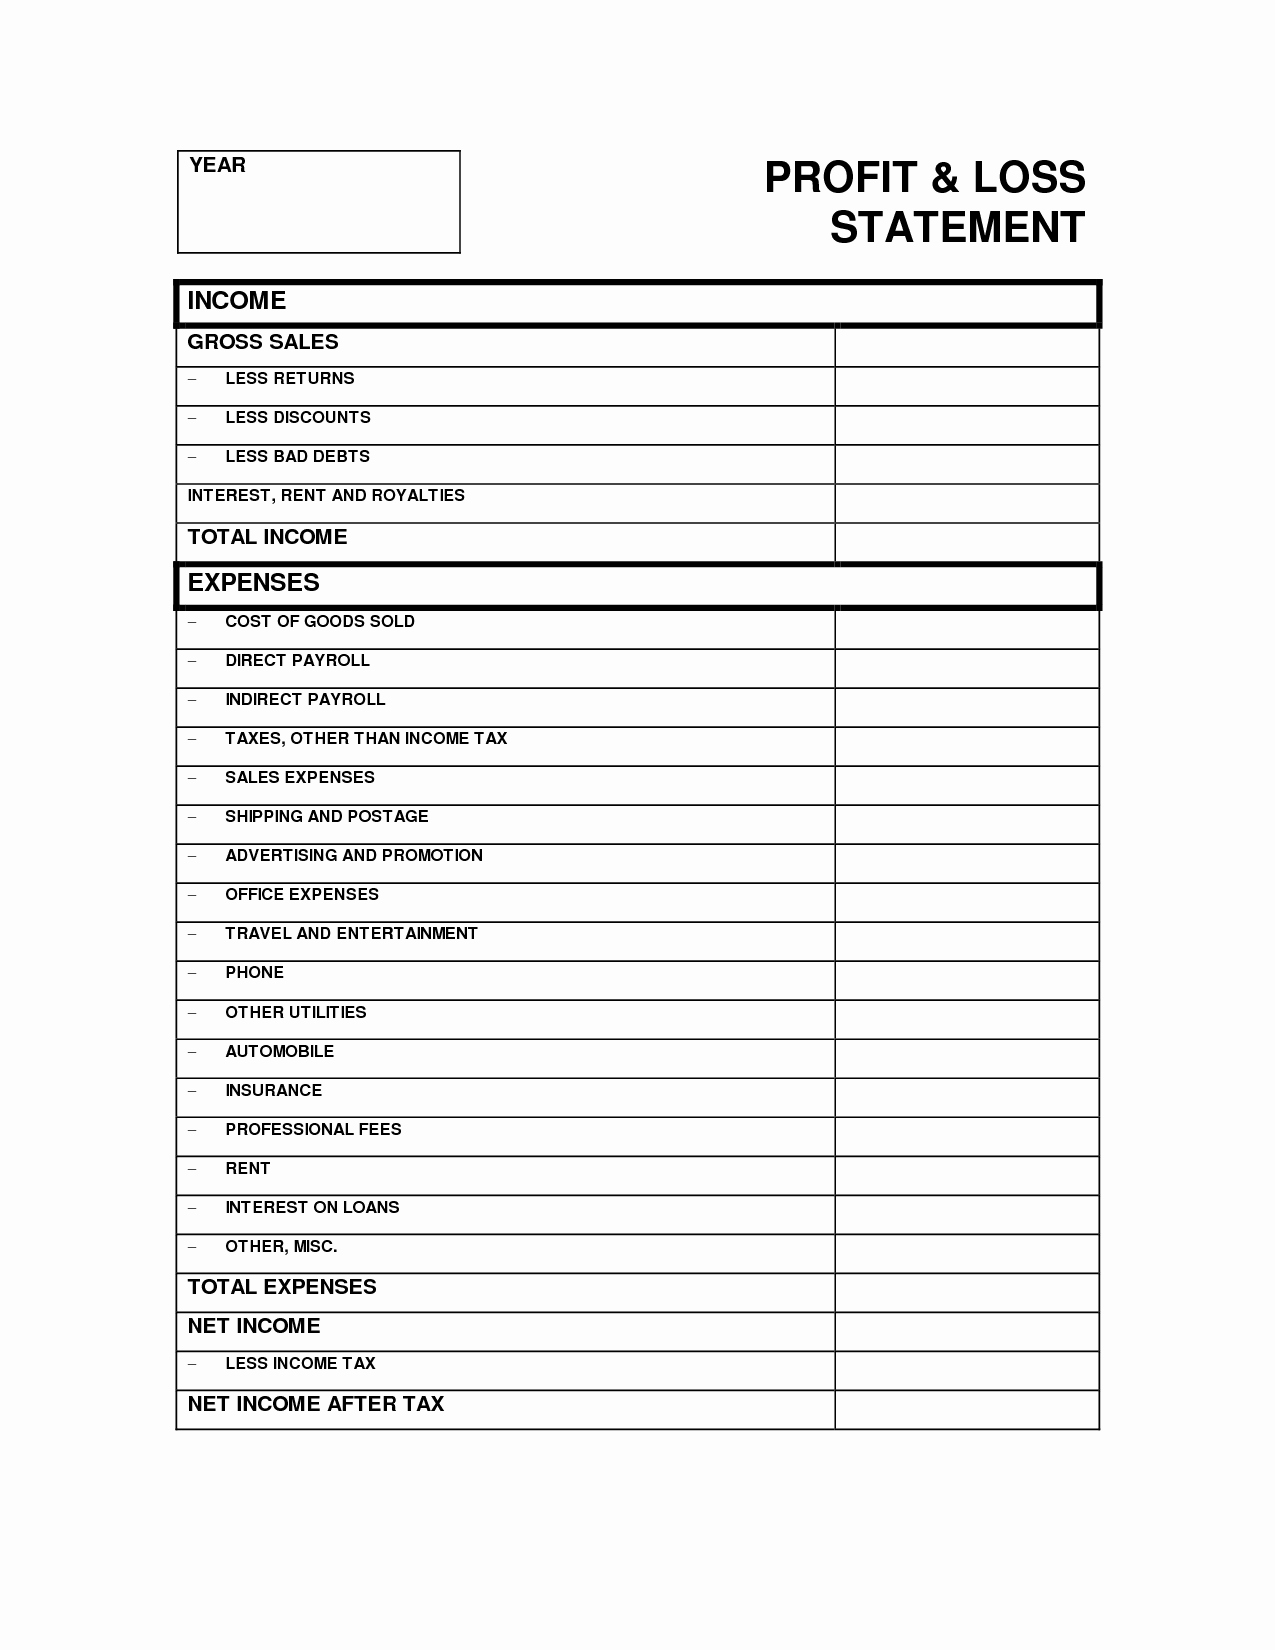 Profit Loss Statement Example Luxury Printable Blank Profit and Loss Statement